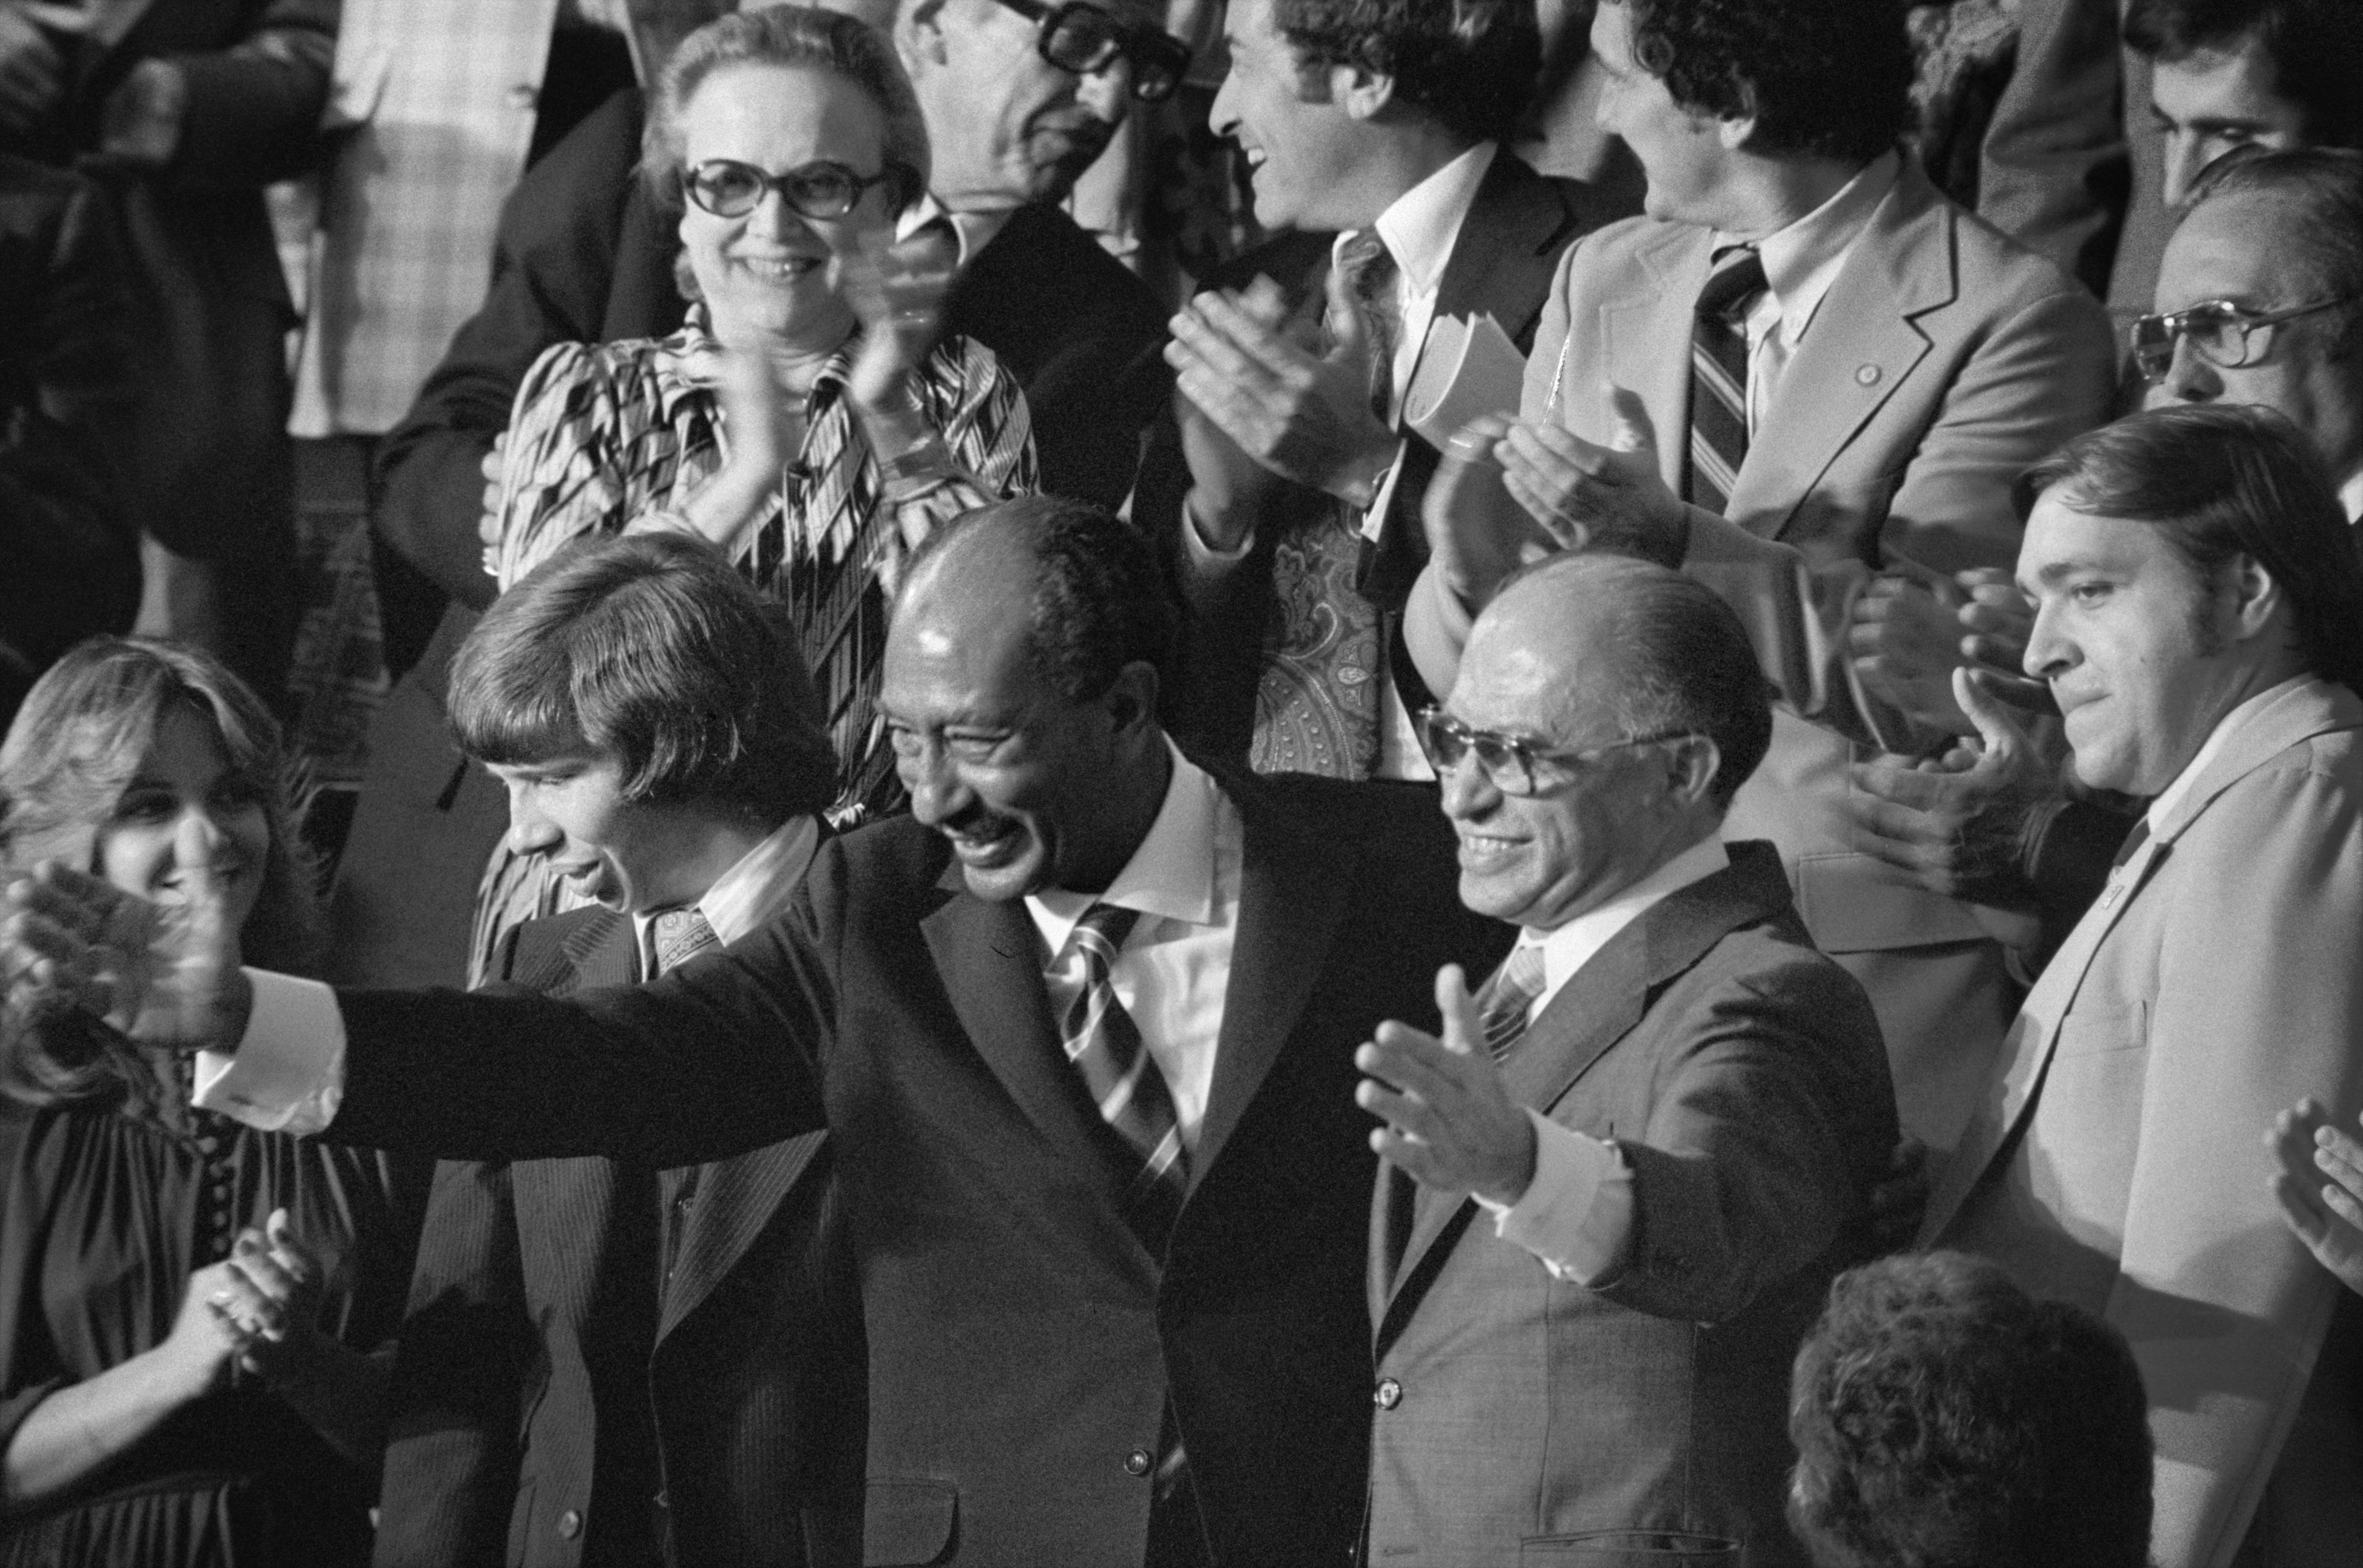 Sadat and Israeli Prime Minister Menachem Begin acknowledge applause during joint session of Congress during which President Jimmy Carter announced the results of the Camp David Accords, Sept. 18, 1978. (Warren Leffler via Wikimedia Commons